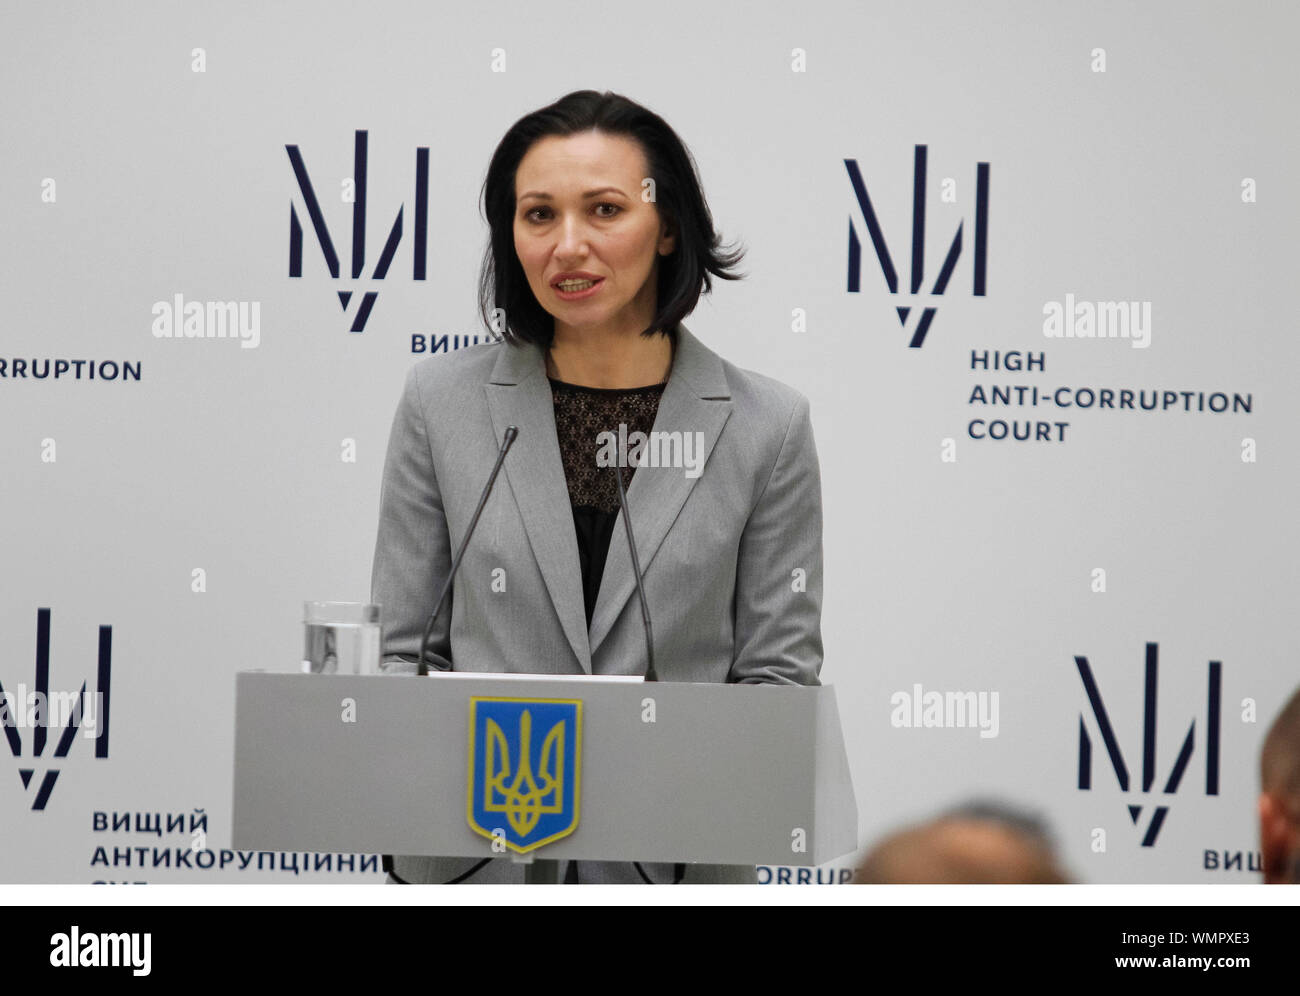 Judge Olena Tanasevych speaks during the launch of the High Anti-Corruption court in Kiev, Ukraine. Stock Photo